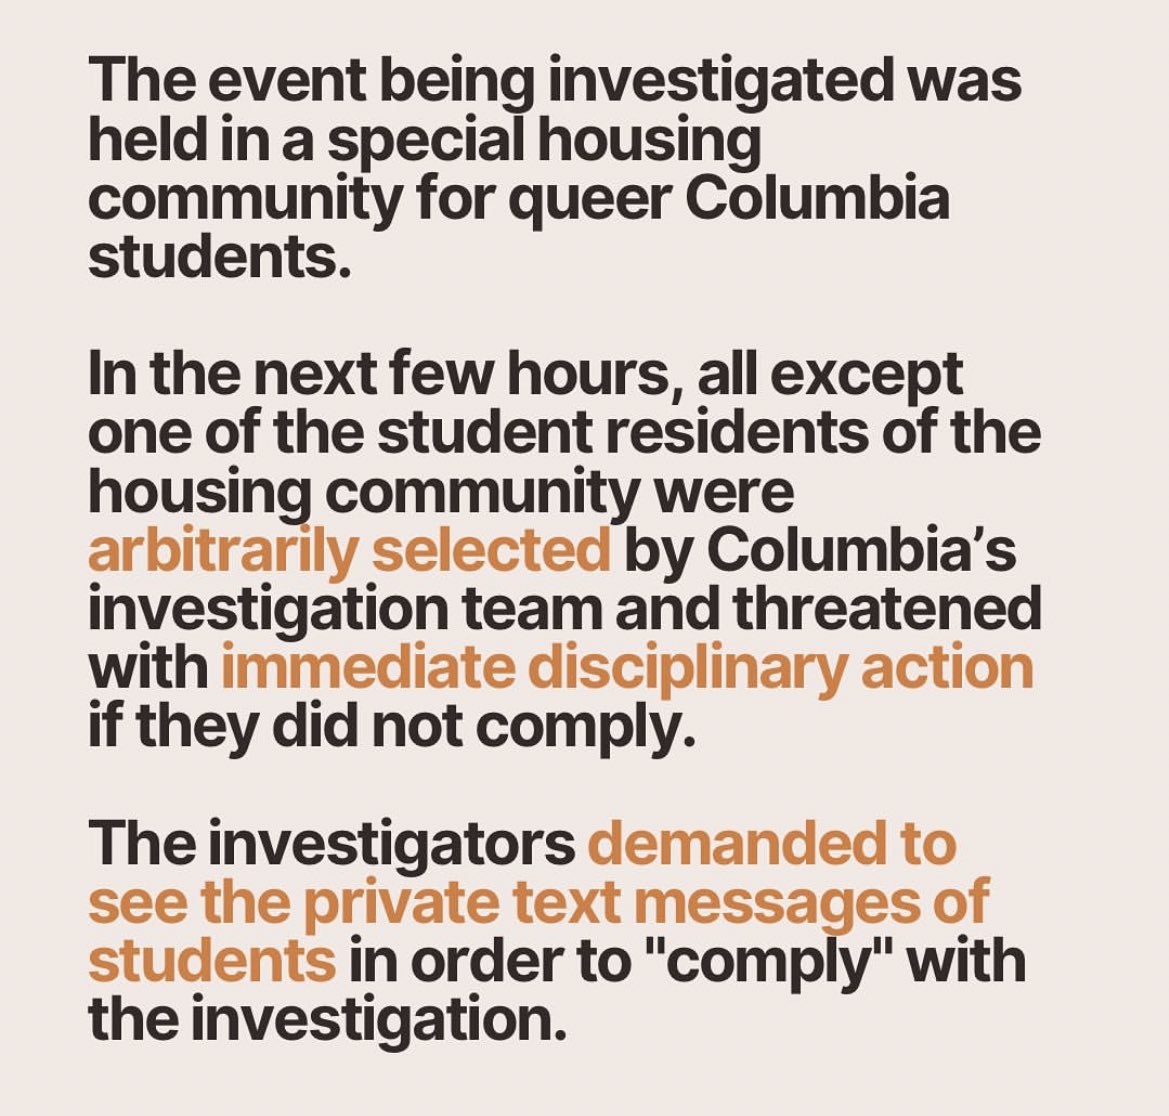 PRESS RELEASE: Last night, Columbia University suspended six students, including a Palestinian student & two jewish students with NO due process as part of an investigation into a campus event about Palestine. These students were evicted & given 24 hours to leave their homes.